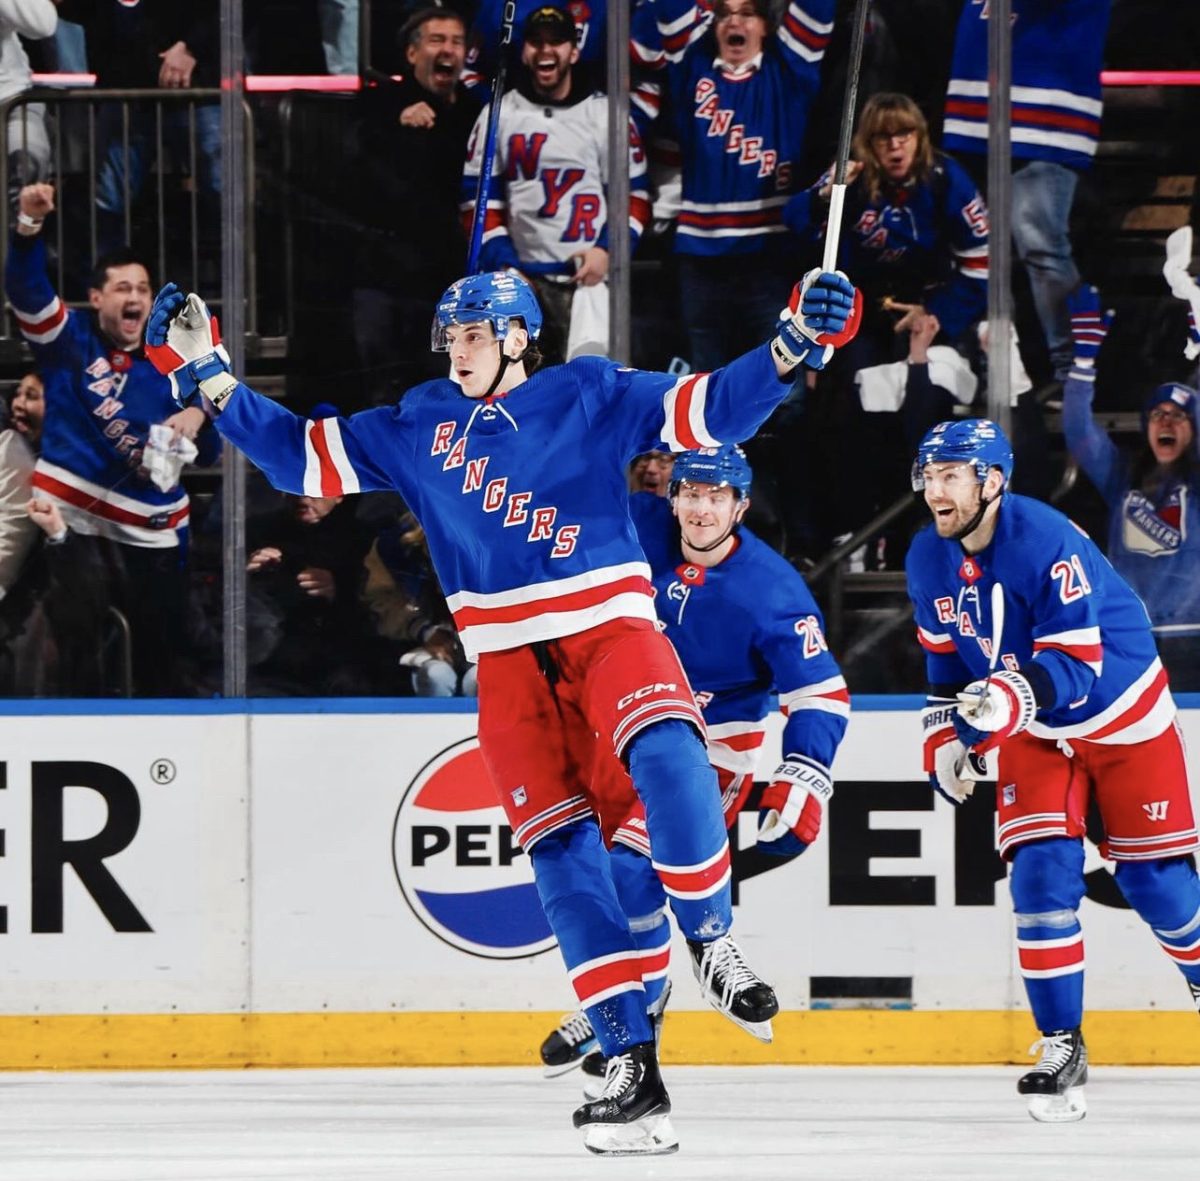 The+Rangers+look+primed+to+make+a+serious+run+at+the+Stanley+Cup+in+this+years+iteration+of+the+NHL+Playoffs.+%28Courtesy+of+Instagram%2F%40nyrangers%29